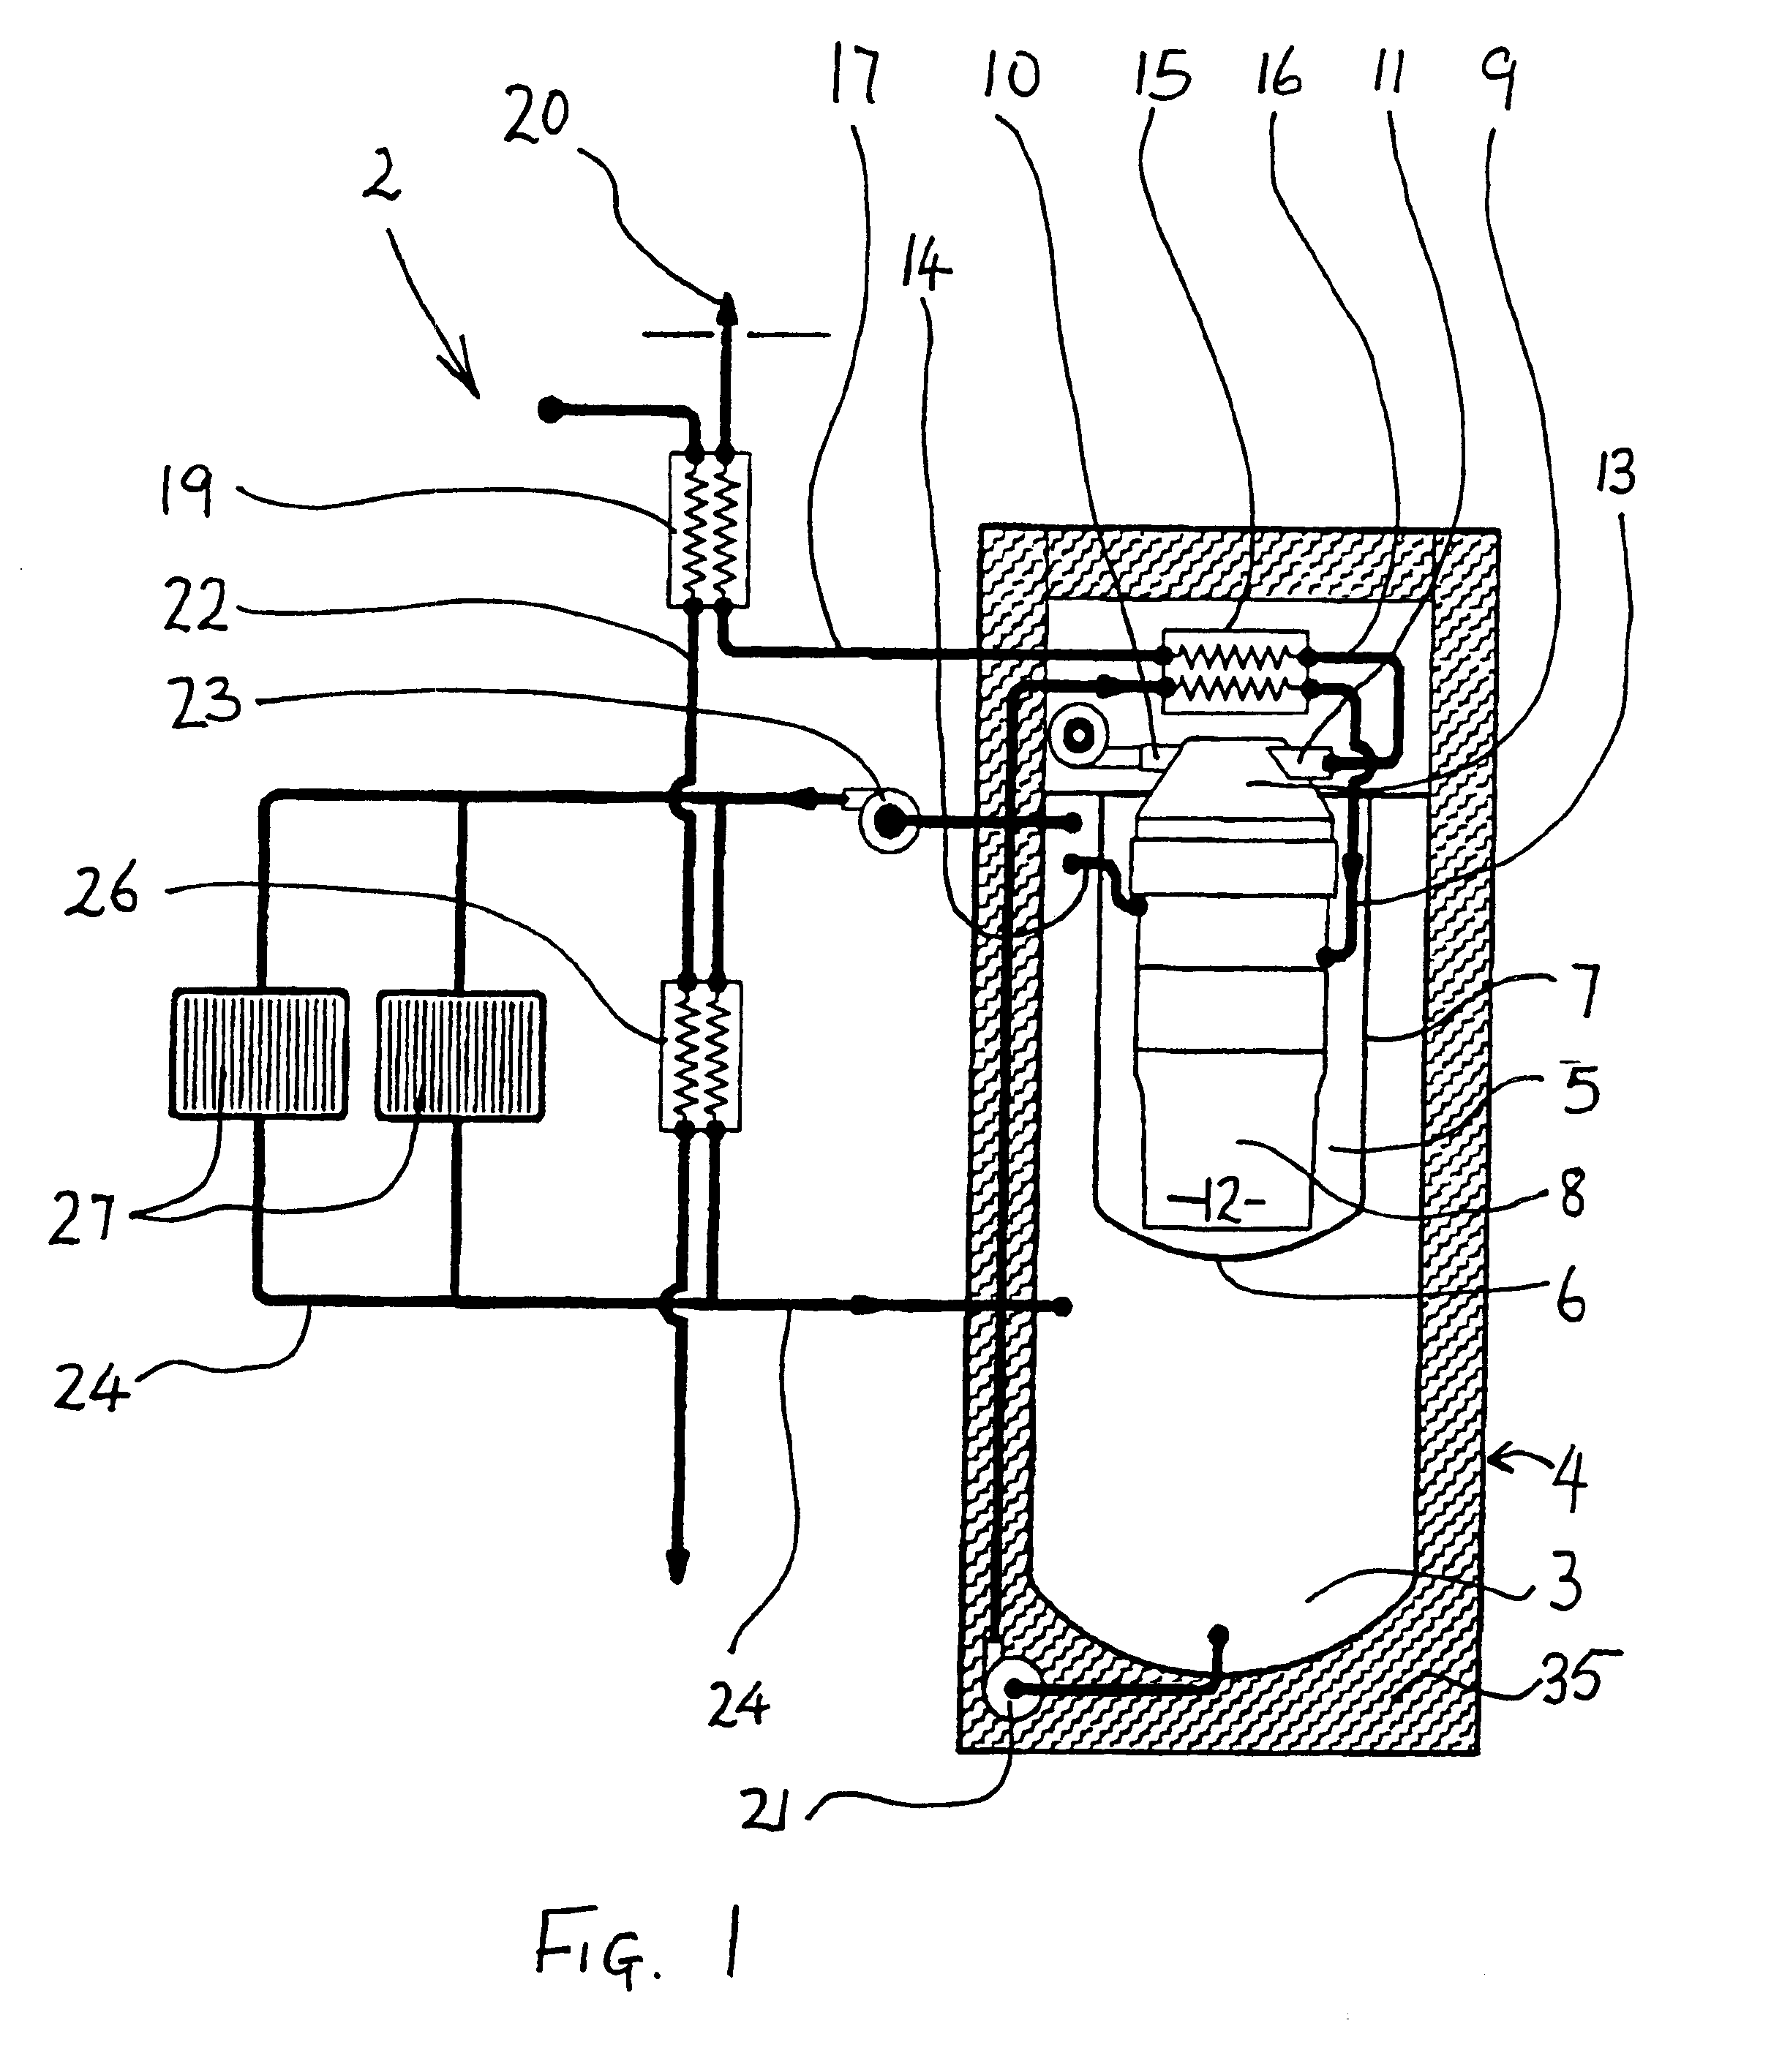 Co-generation system employing a stirling engine